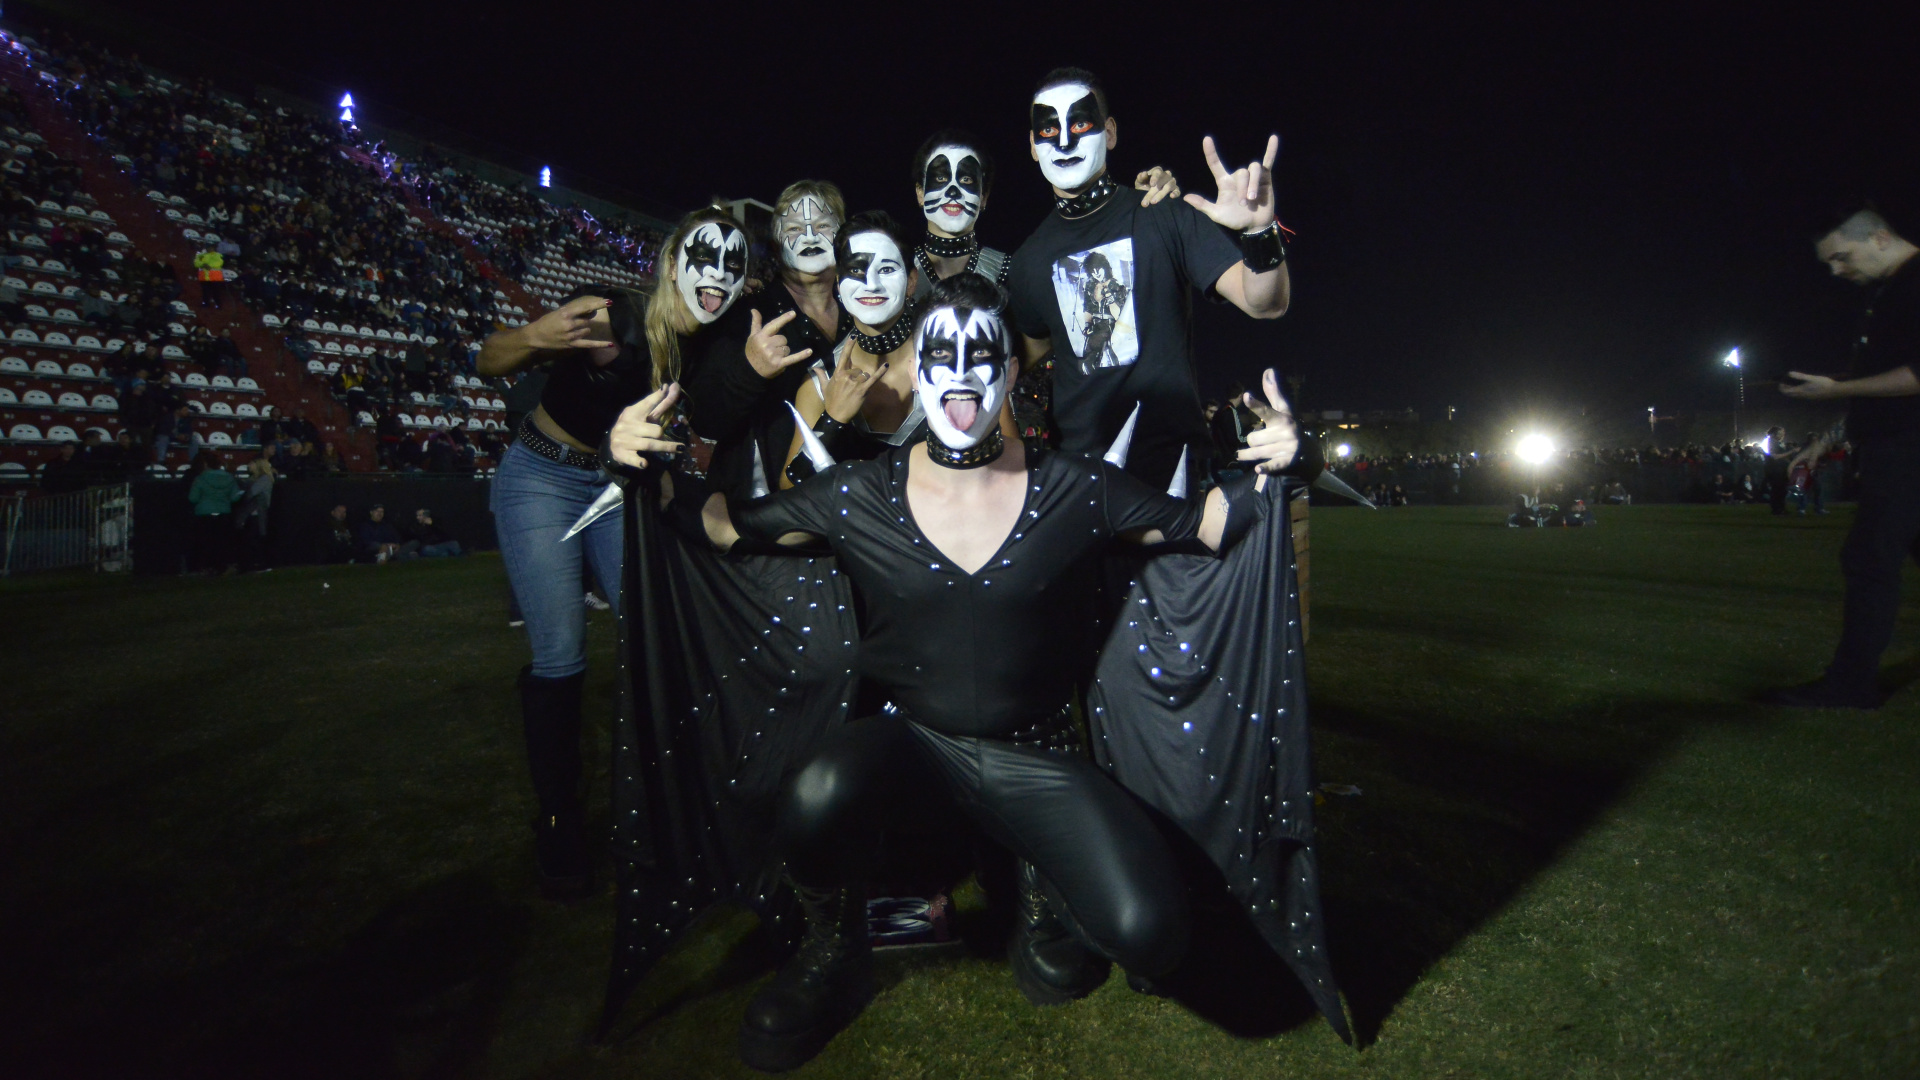 The complete Kiss Army of Argentina at the Campo Argentino de Polo